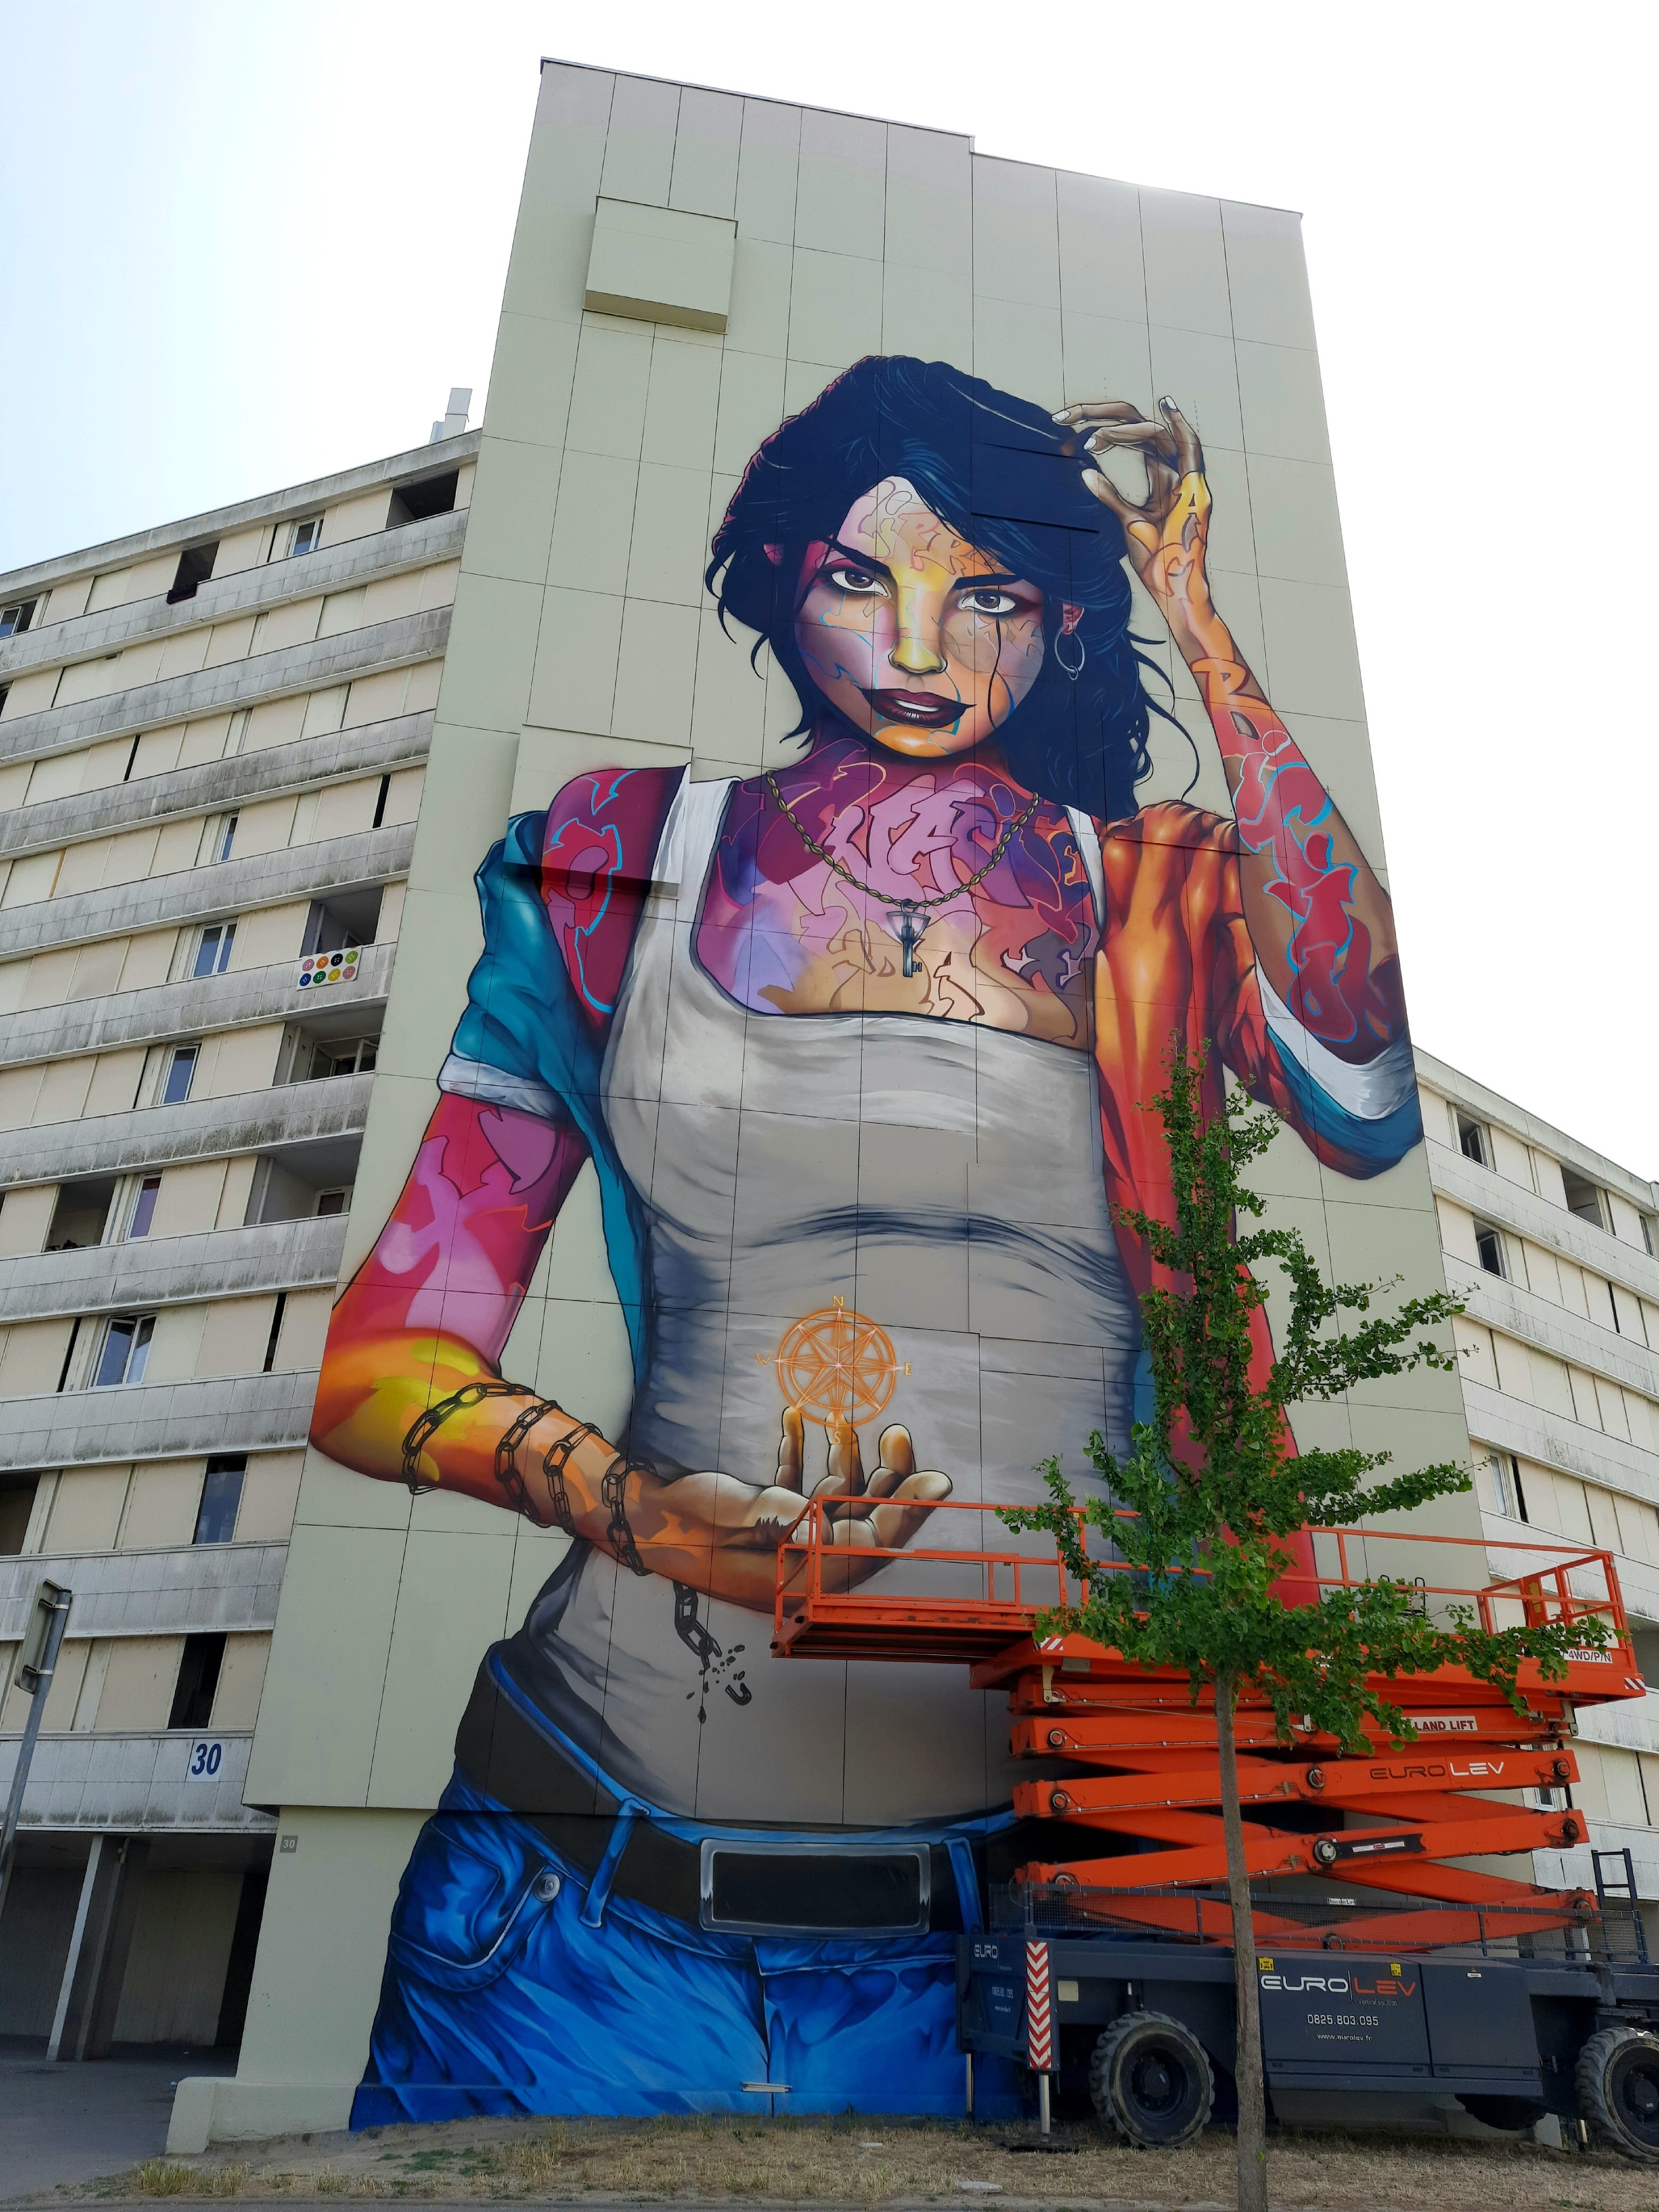 Graffiti 6459  by the artist Snake captured by Mephisroth in Toulouse France